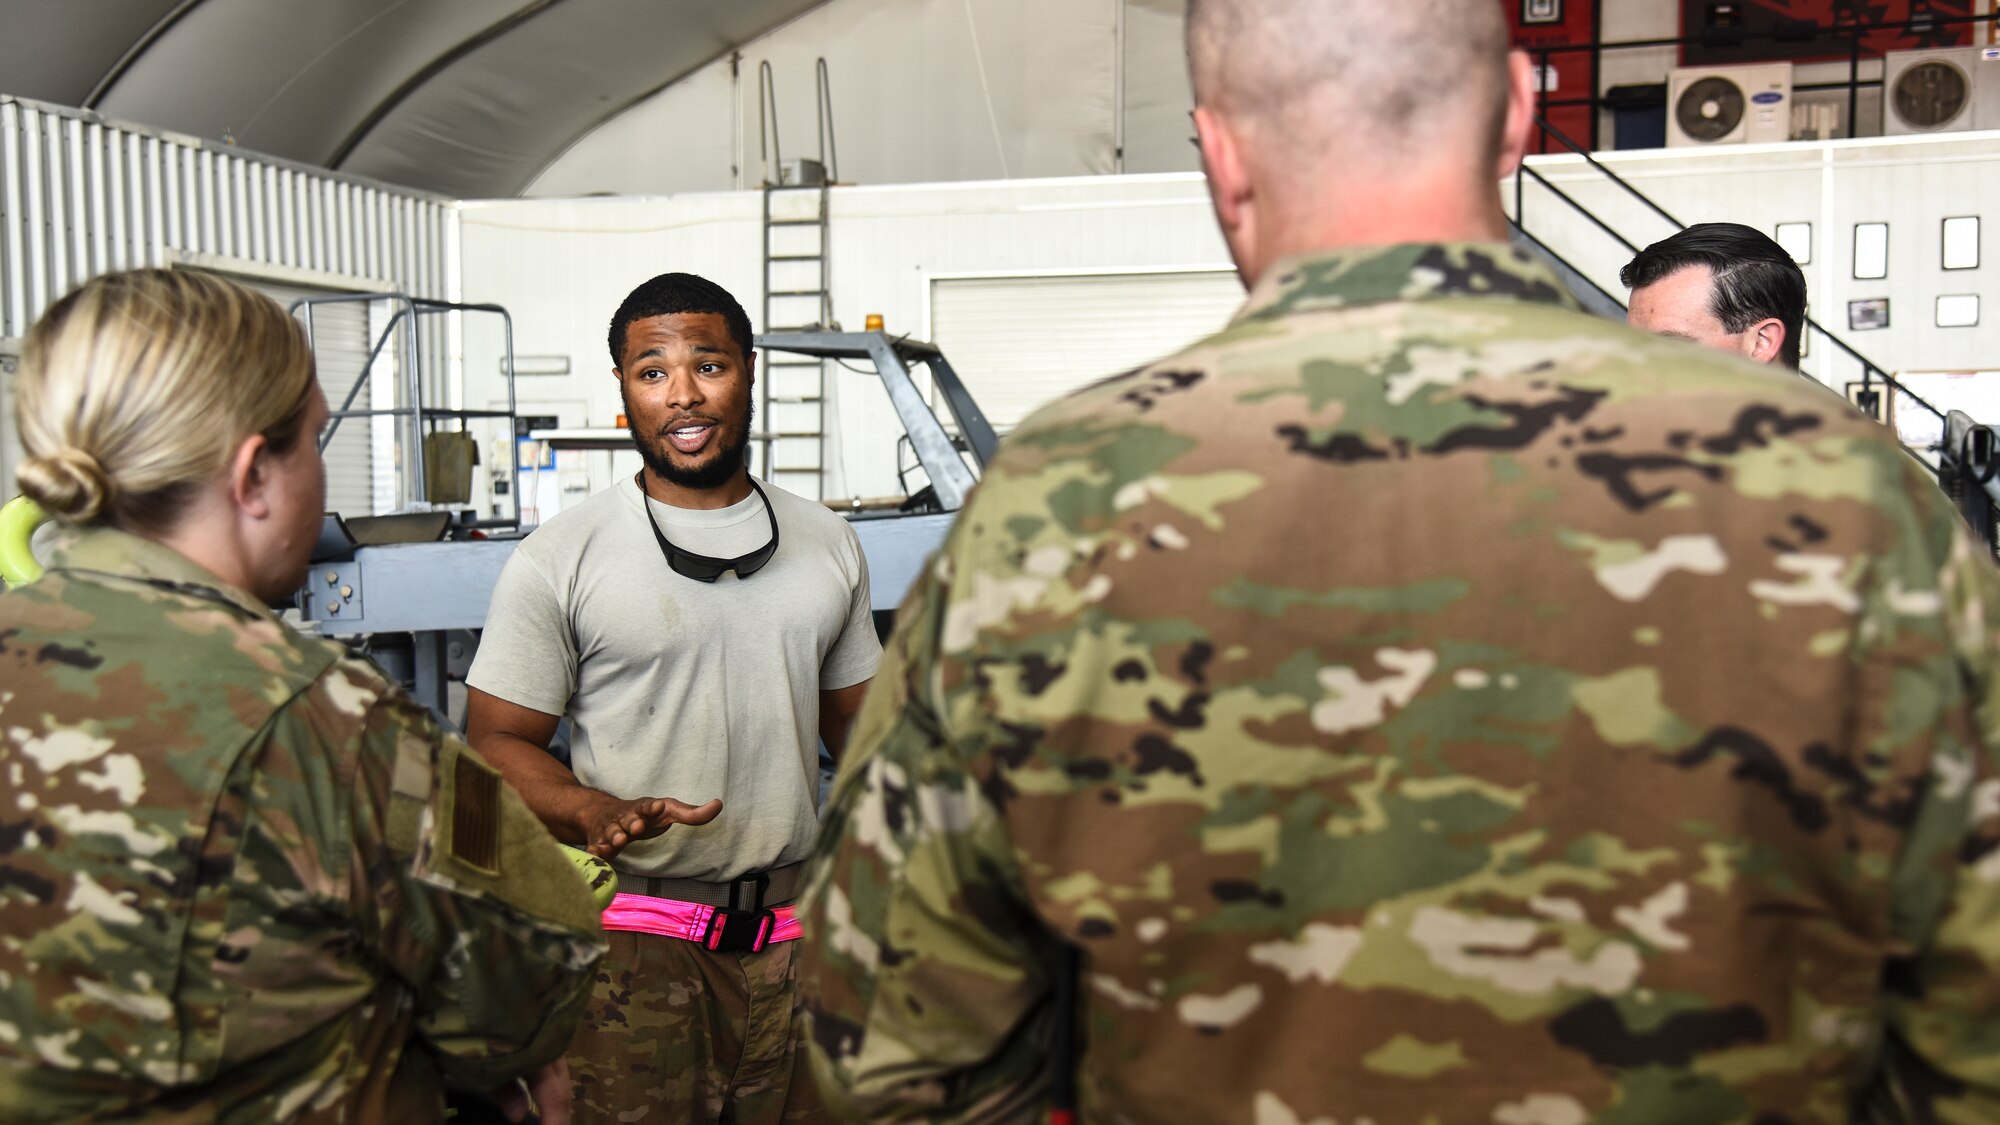 U.S. Air Force Staff Sgt. Joshua Brown, 380th Expeditionary Aircraft Maintenance Squadron U-2 Dragon Lady aircraft repair mechanic and Crash Damaged or Disabled Aircraft Recovery team member, conducts familiarization training on a U-2 at Al Dhafra Air Base, United Arab Emirates, Nov. 14, 2018. The CDDAR team is not only responsible for responding to the aircraft assigned to ADAB, but all aircraft in the U.S. Air Forces Central Command area of responsibility. The AFCENT AOR ranges from the top of Uzbekistan near the Aral Sea, all the way to the southern tip of Yemen – spanning across 20 Central and Southwest Asian countries. (U.S. Air Force photo by Senior Airman Mya M. Crosby)